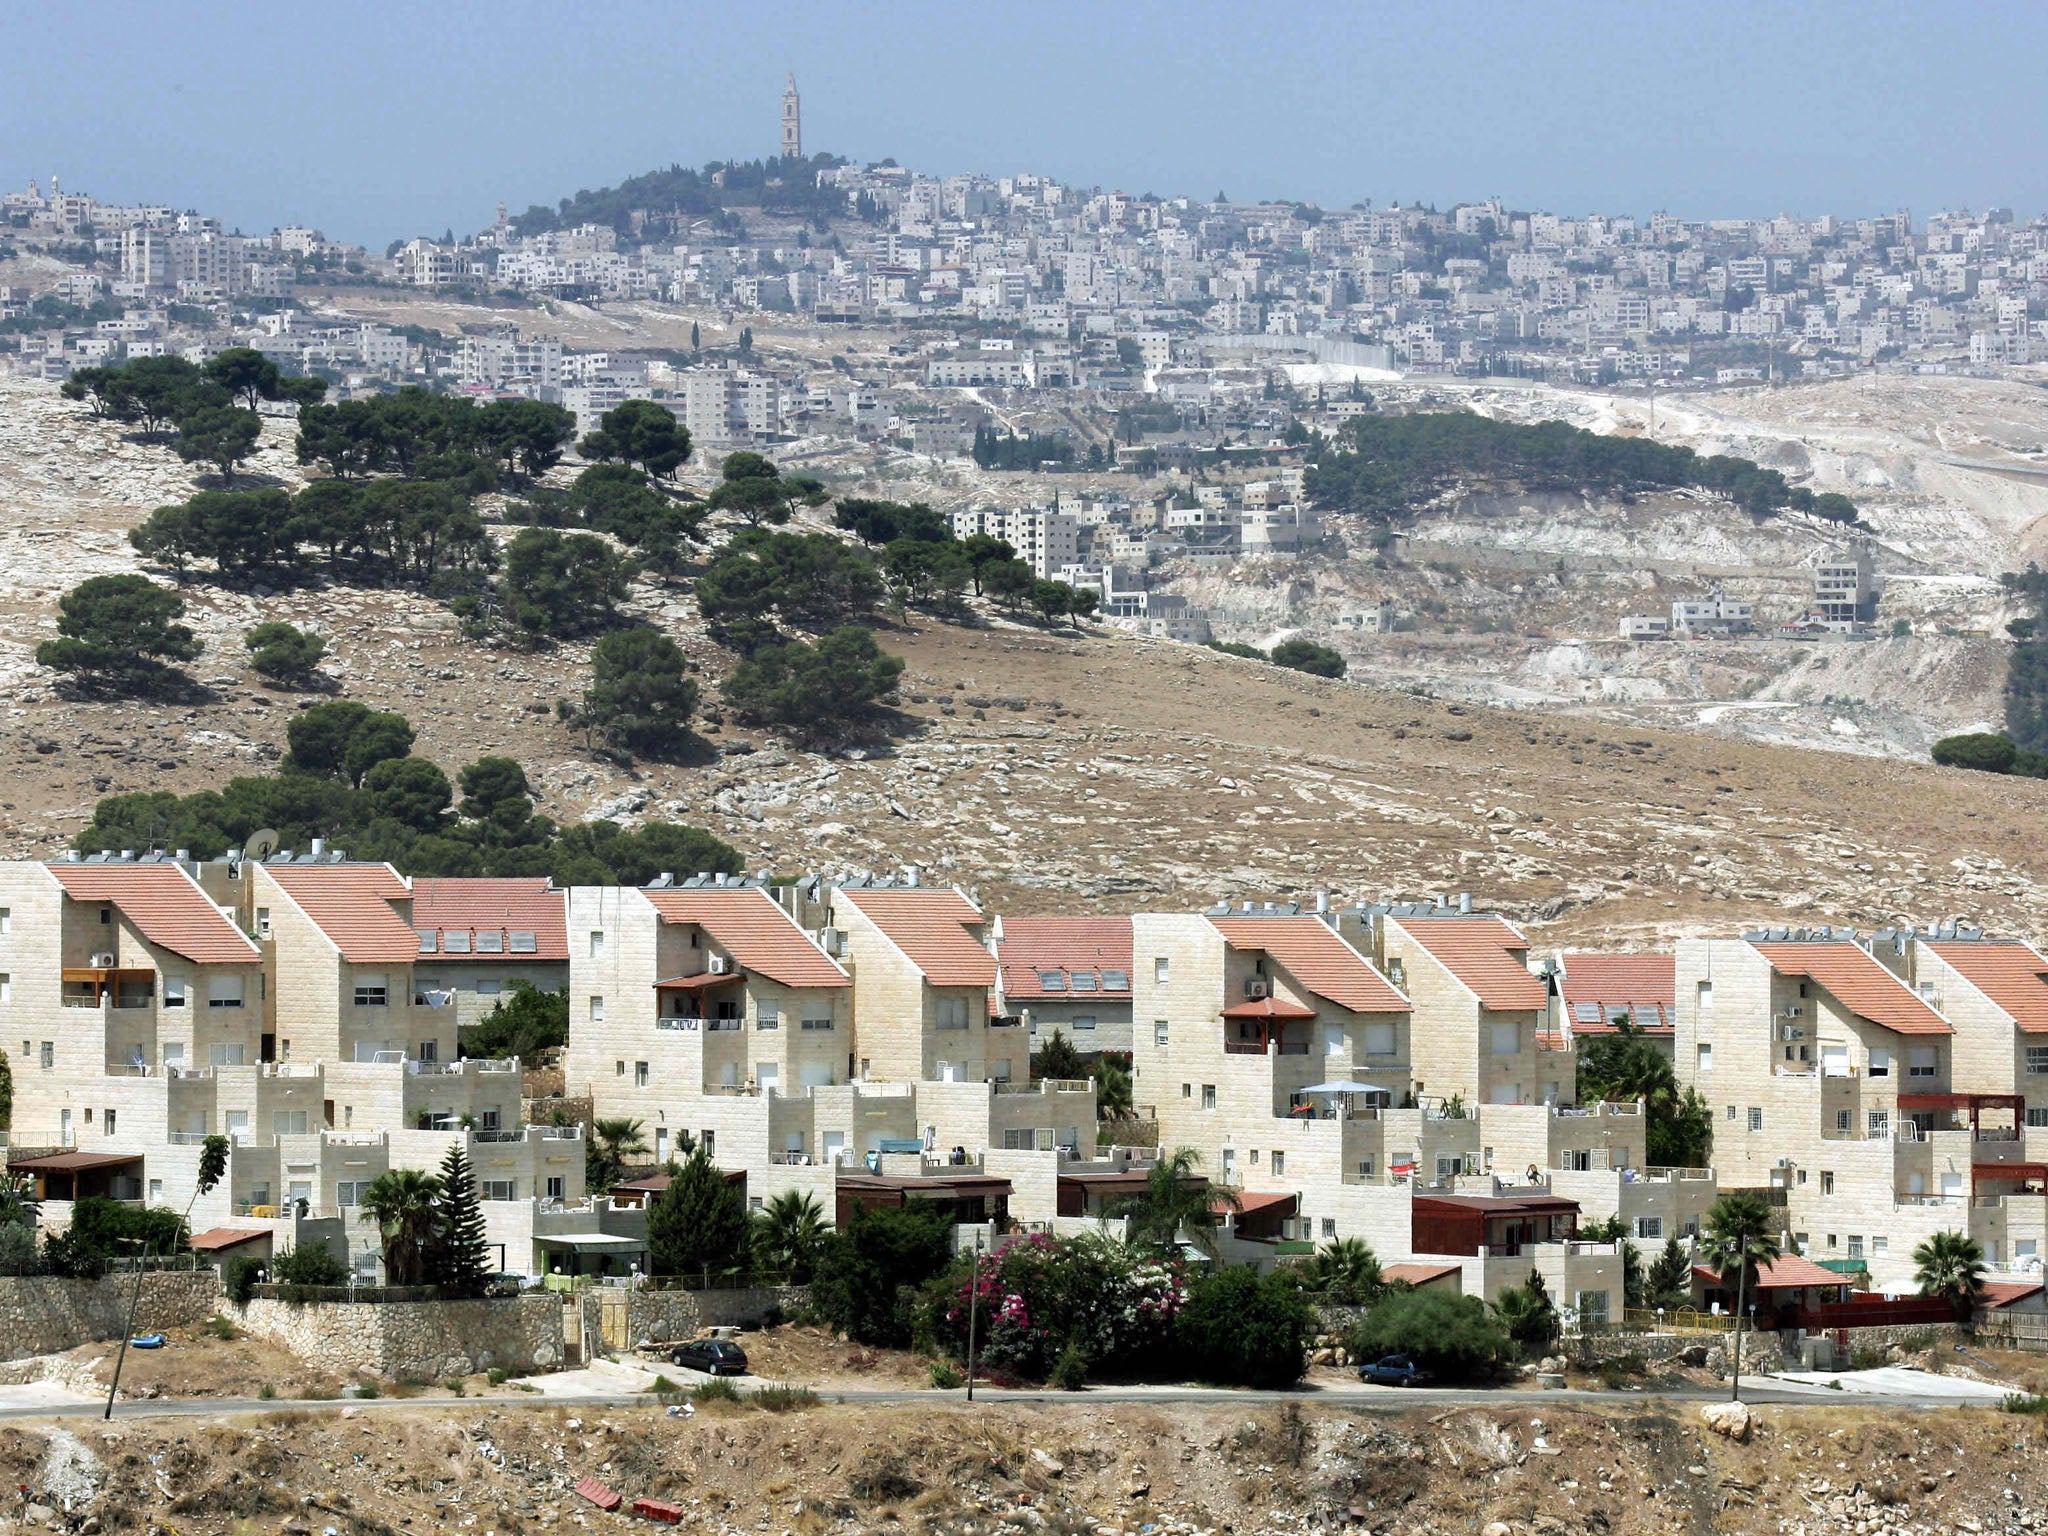 Houses (foreground) of a West Bank settlement in Maale Adumim